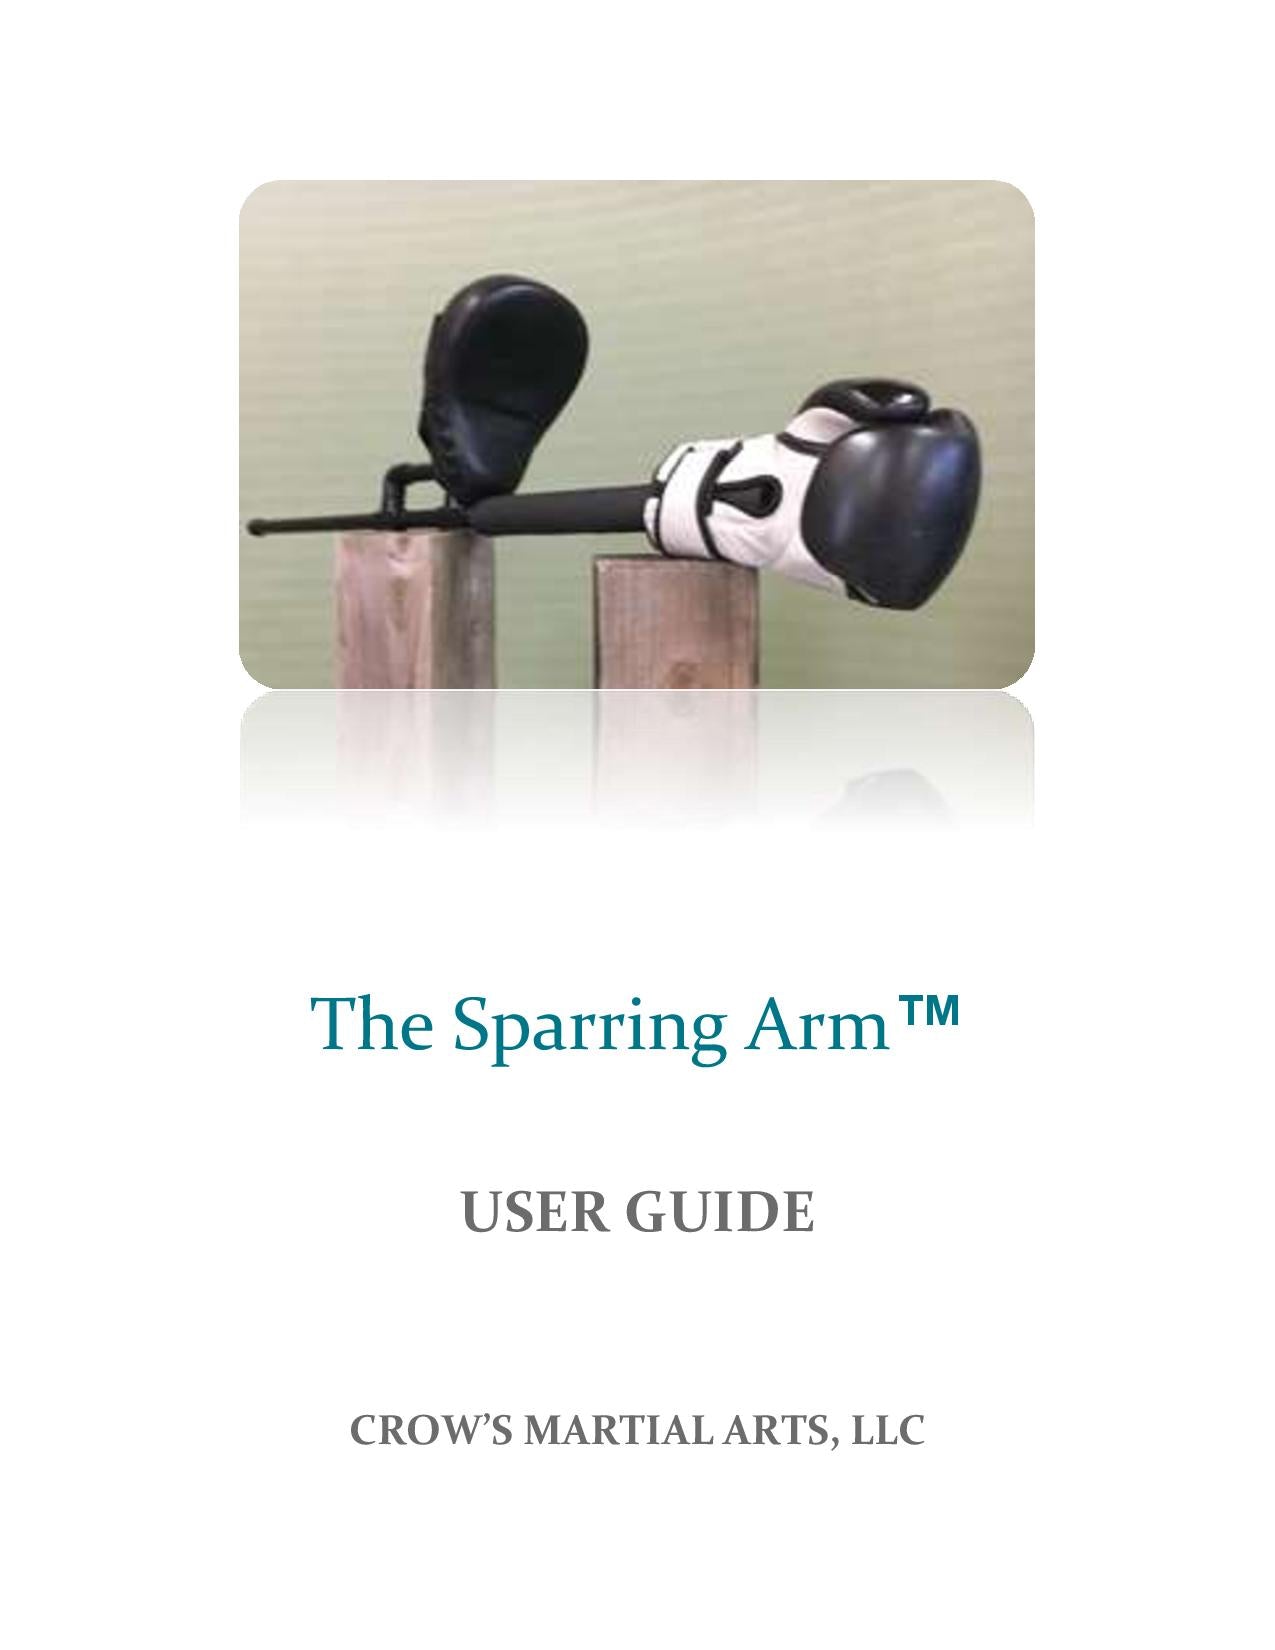 The Sparring Arm™ Bruce Lee Training Aid